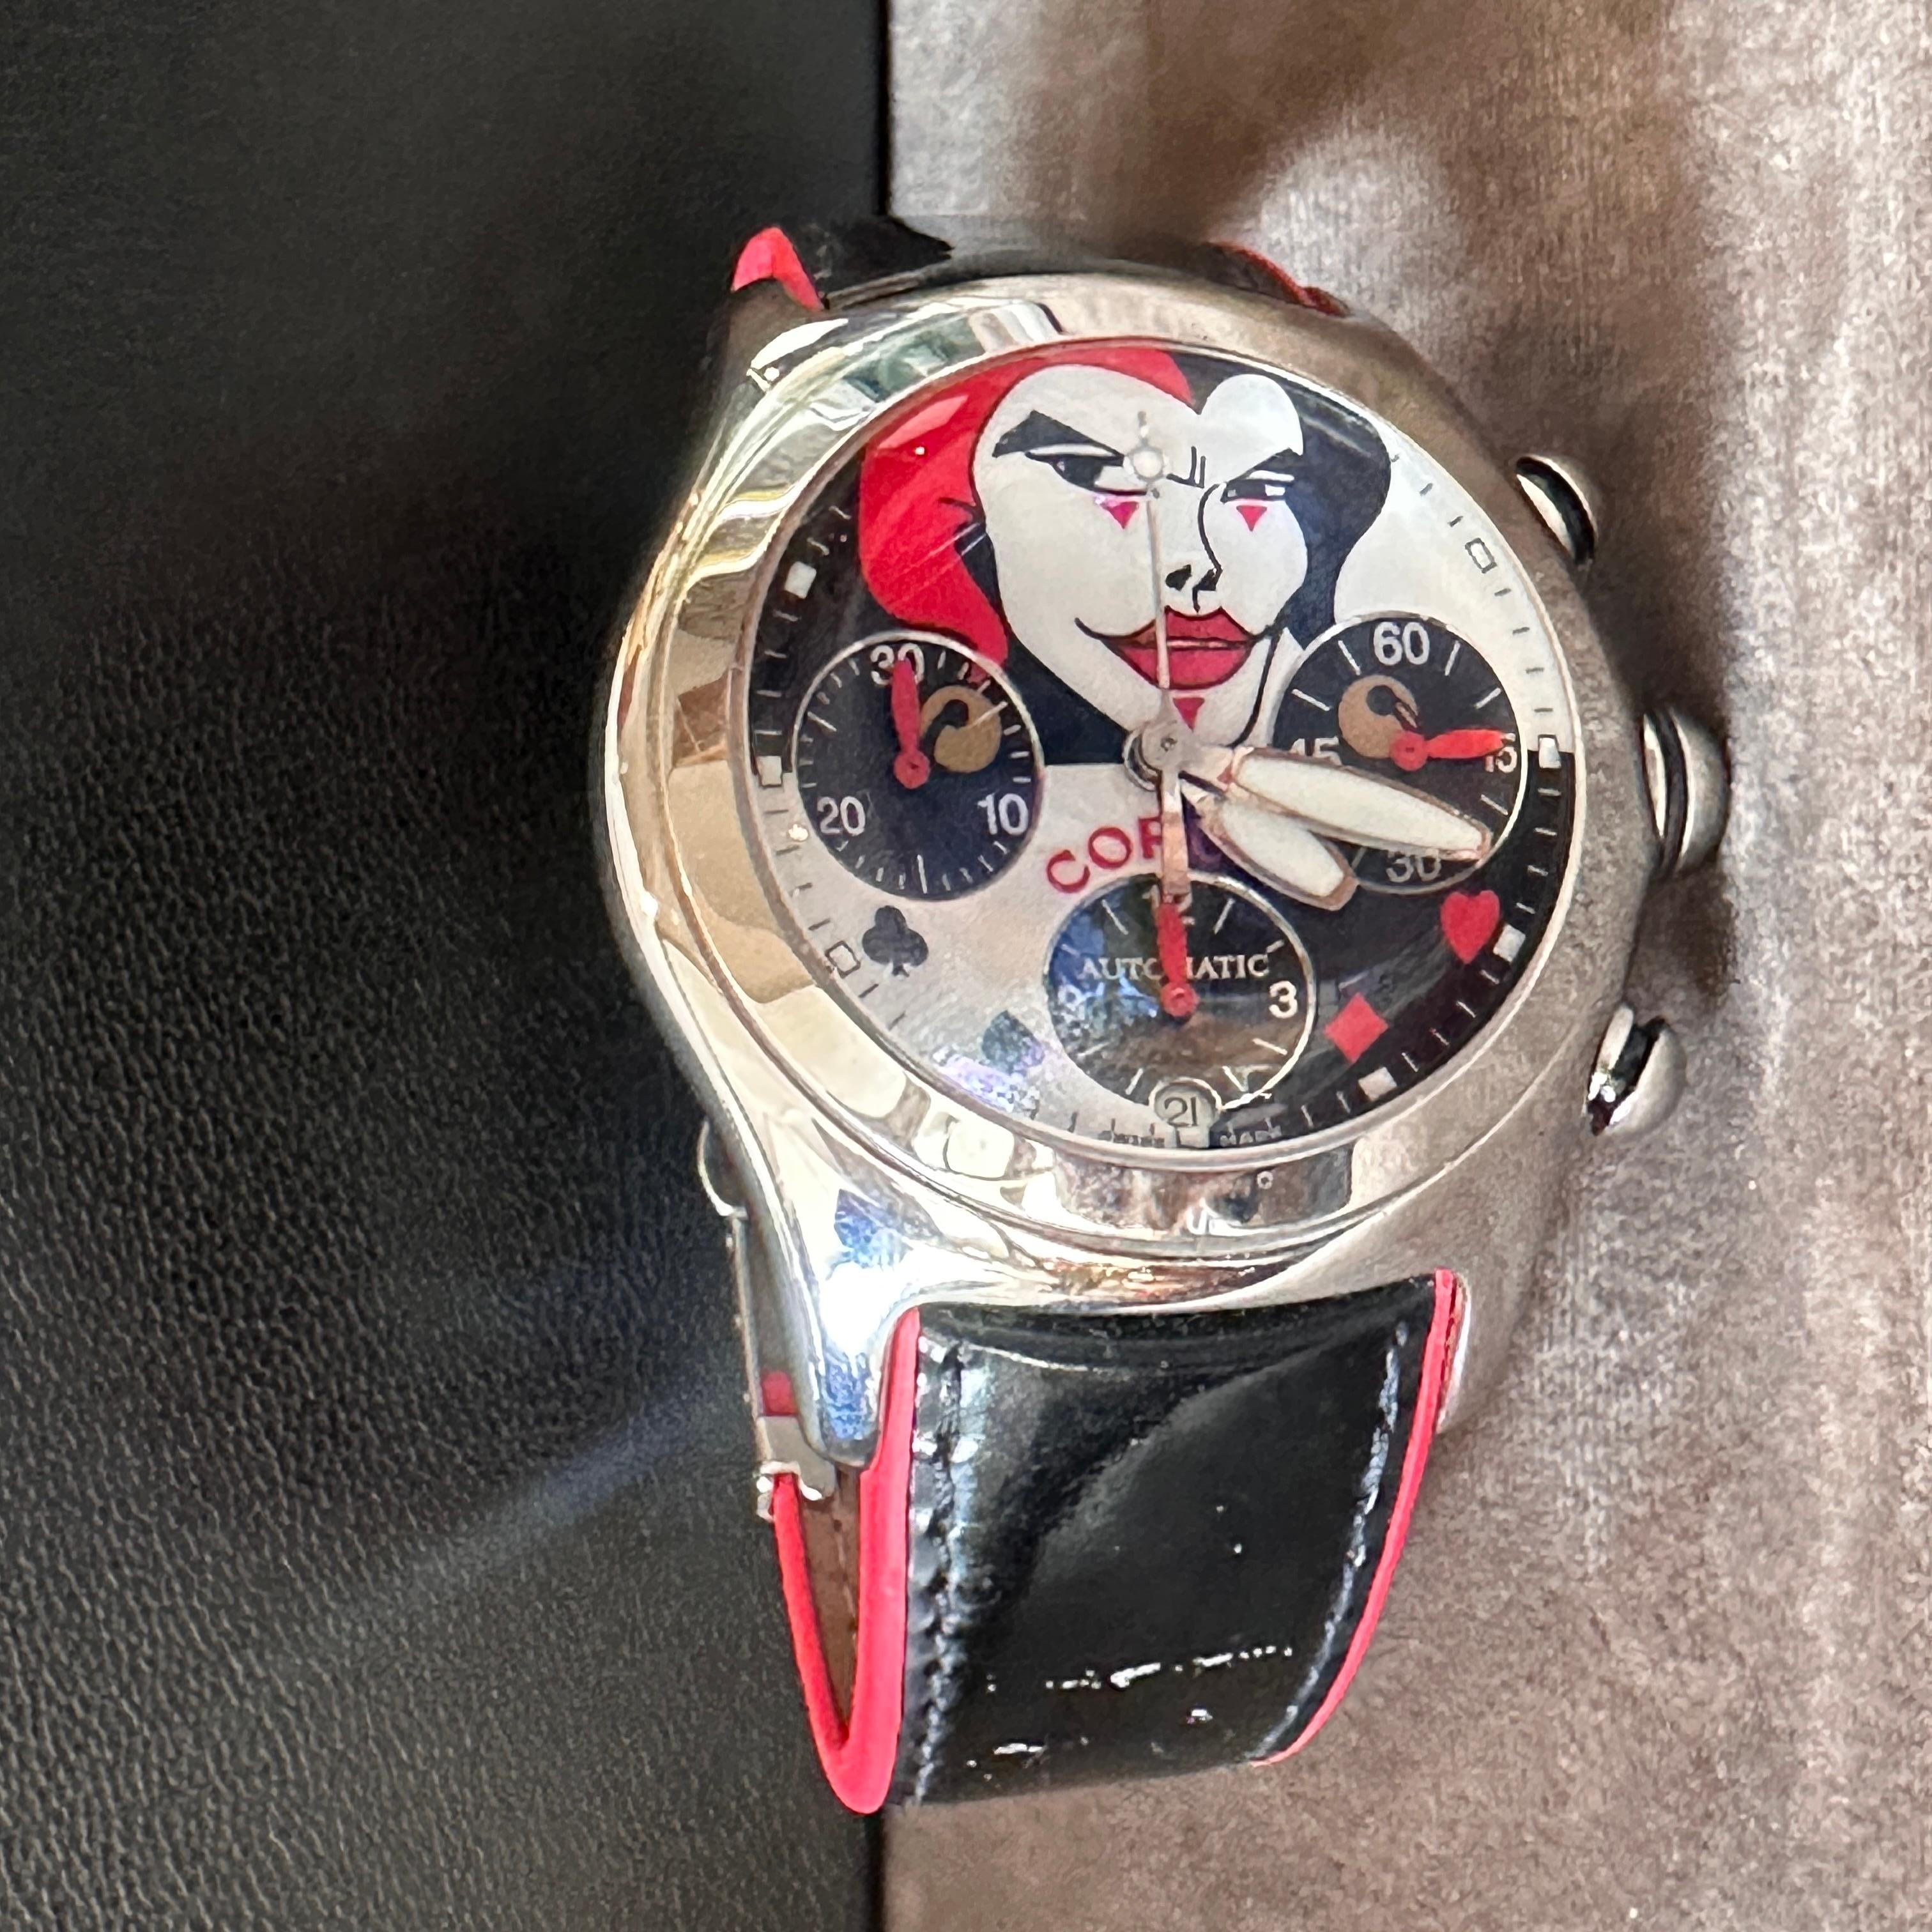 2002 Full Set Joker limited Edition Bubble Chronograph ref. 28524020 by Corum For Sale 2